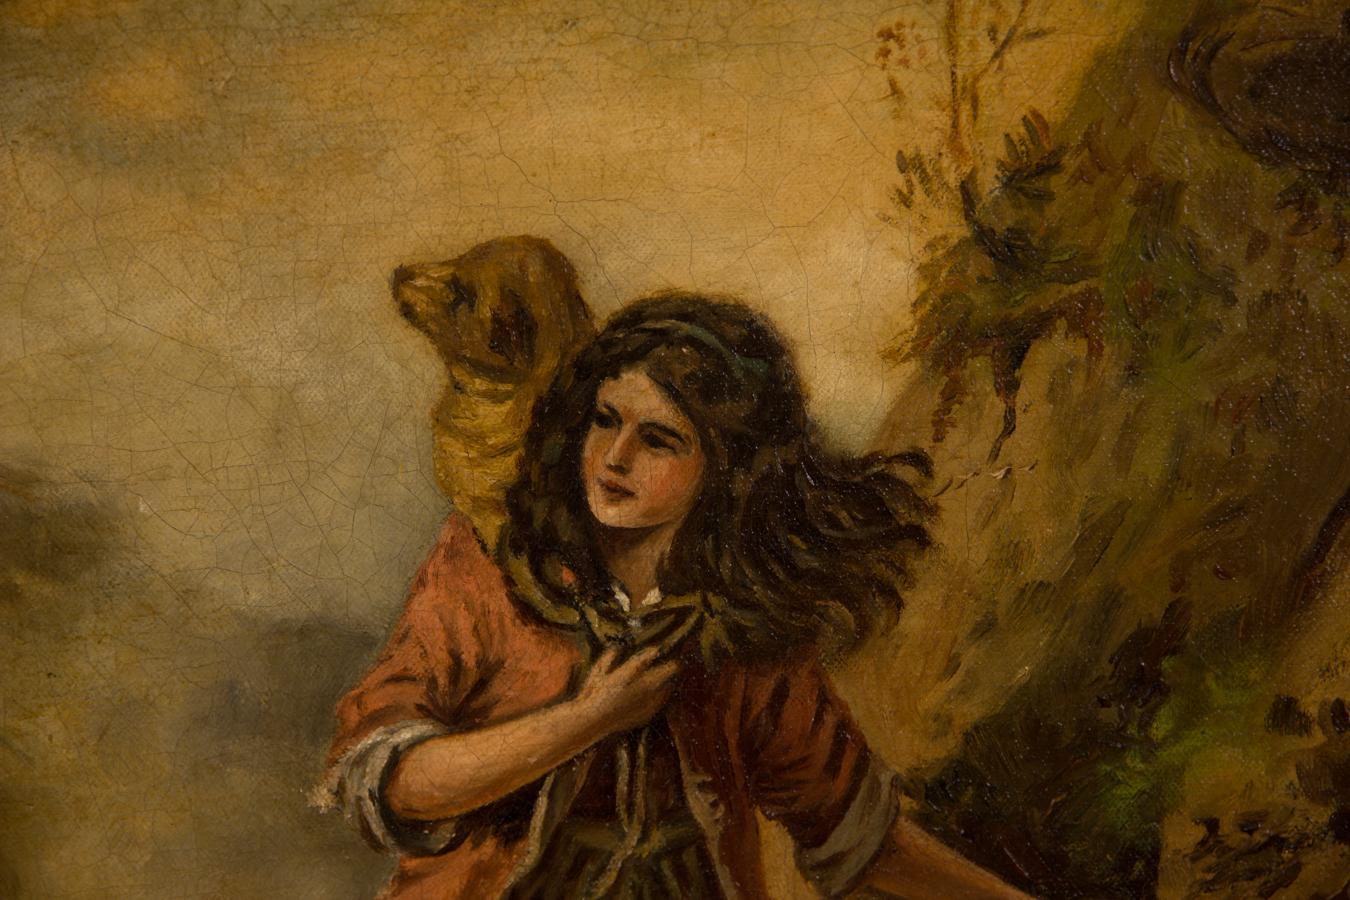 

An interesting portrait of a young girl walking barefoot along a rocky cliff path, with a dog at her feet and a young lamb over her shoulders. A bird of prey hovers overhead. This atmospheric and symbolic composition instantly captures the